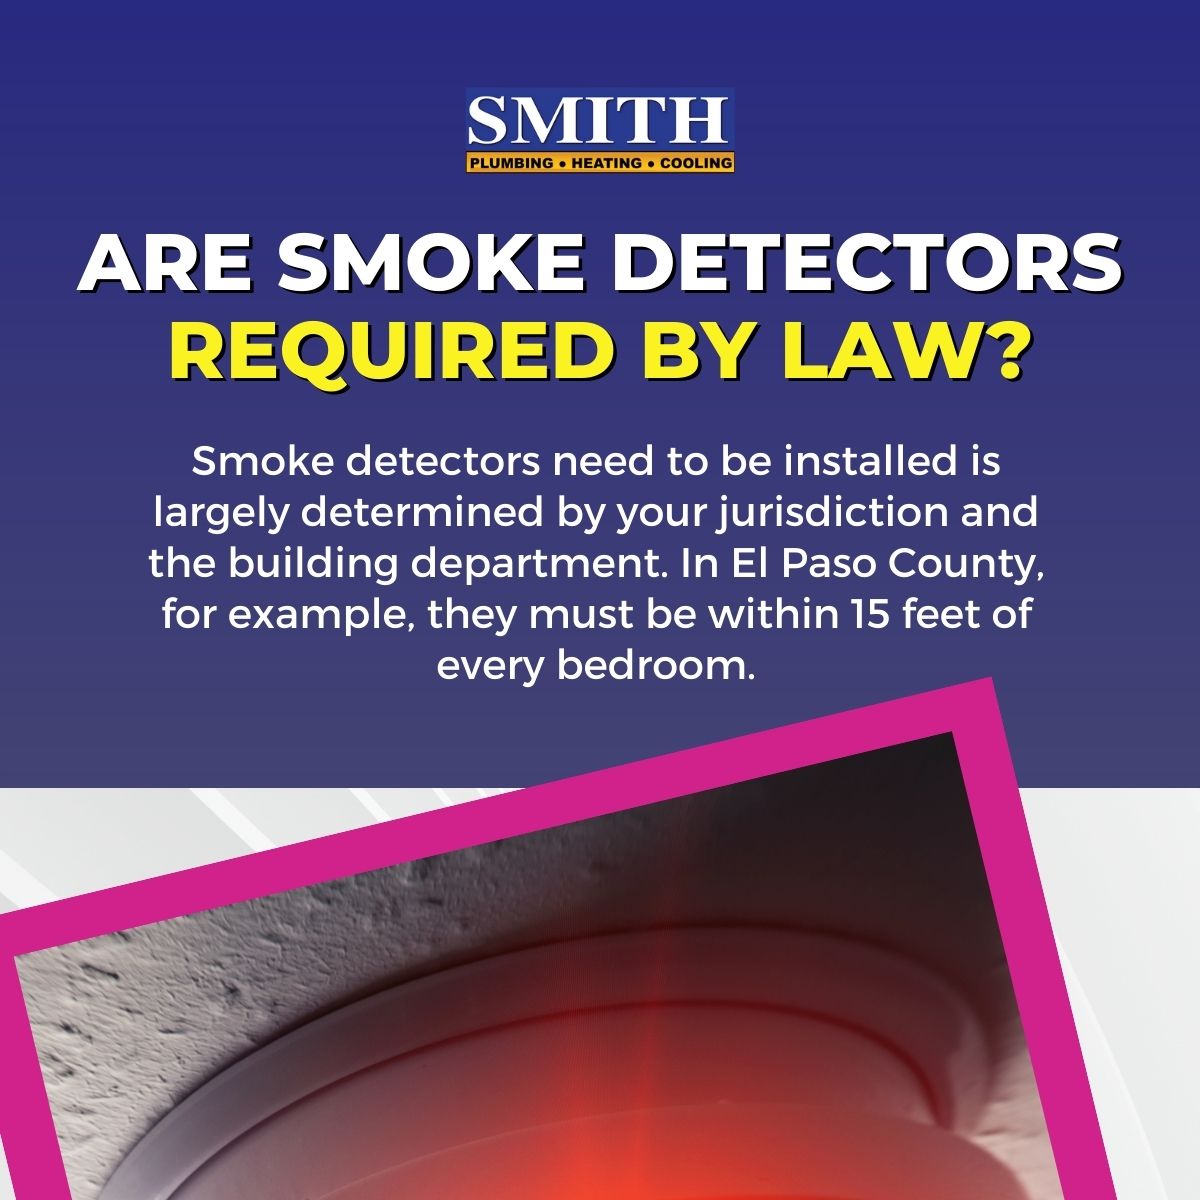 Are smoke detectors requires by law?